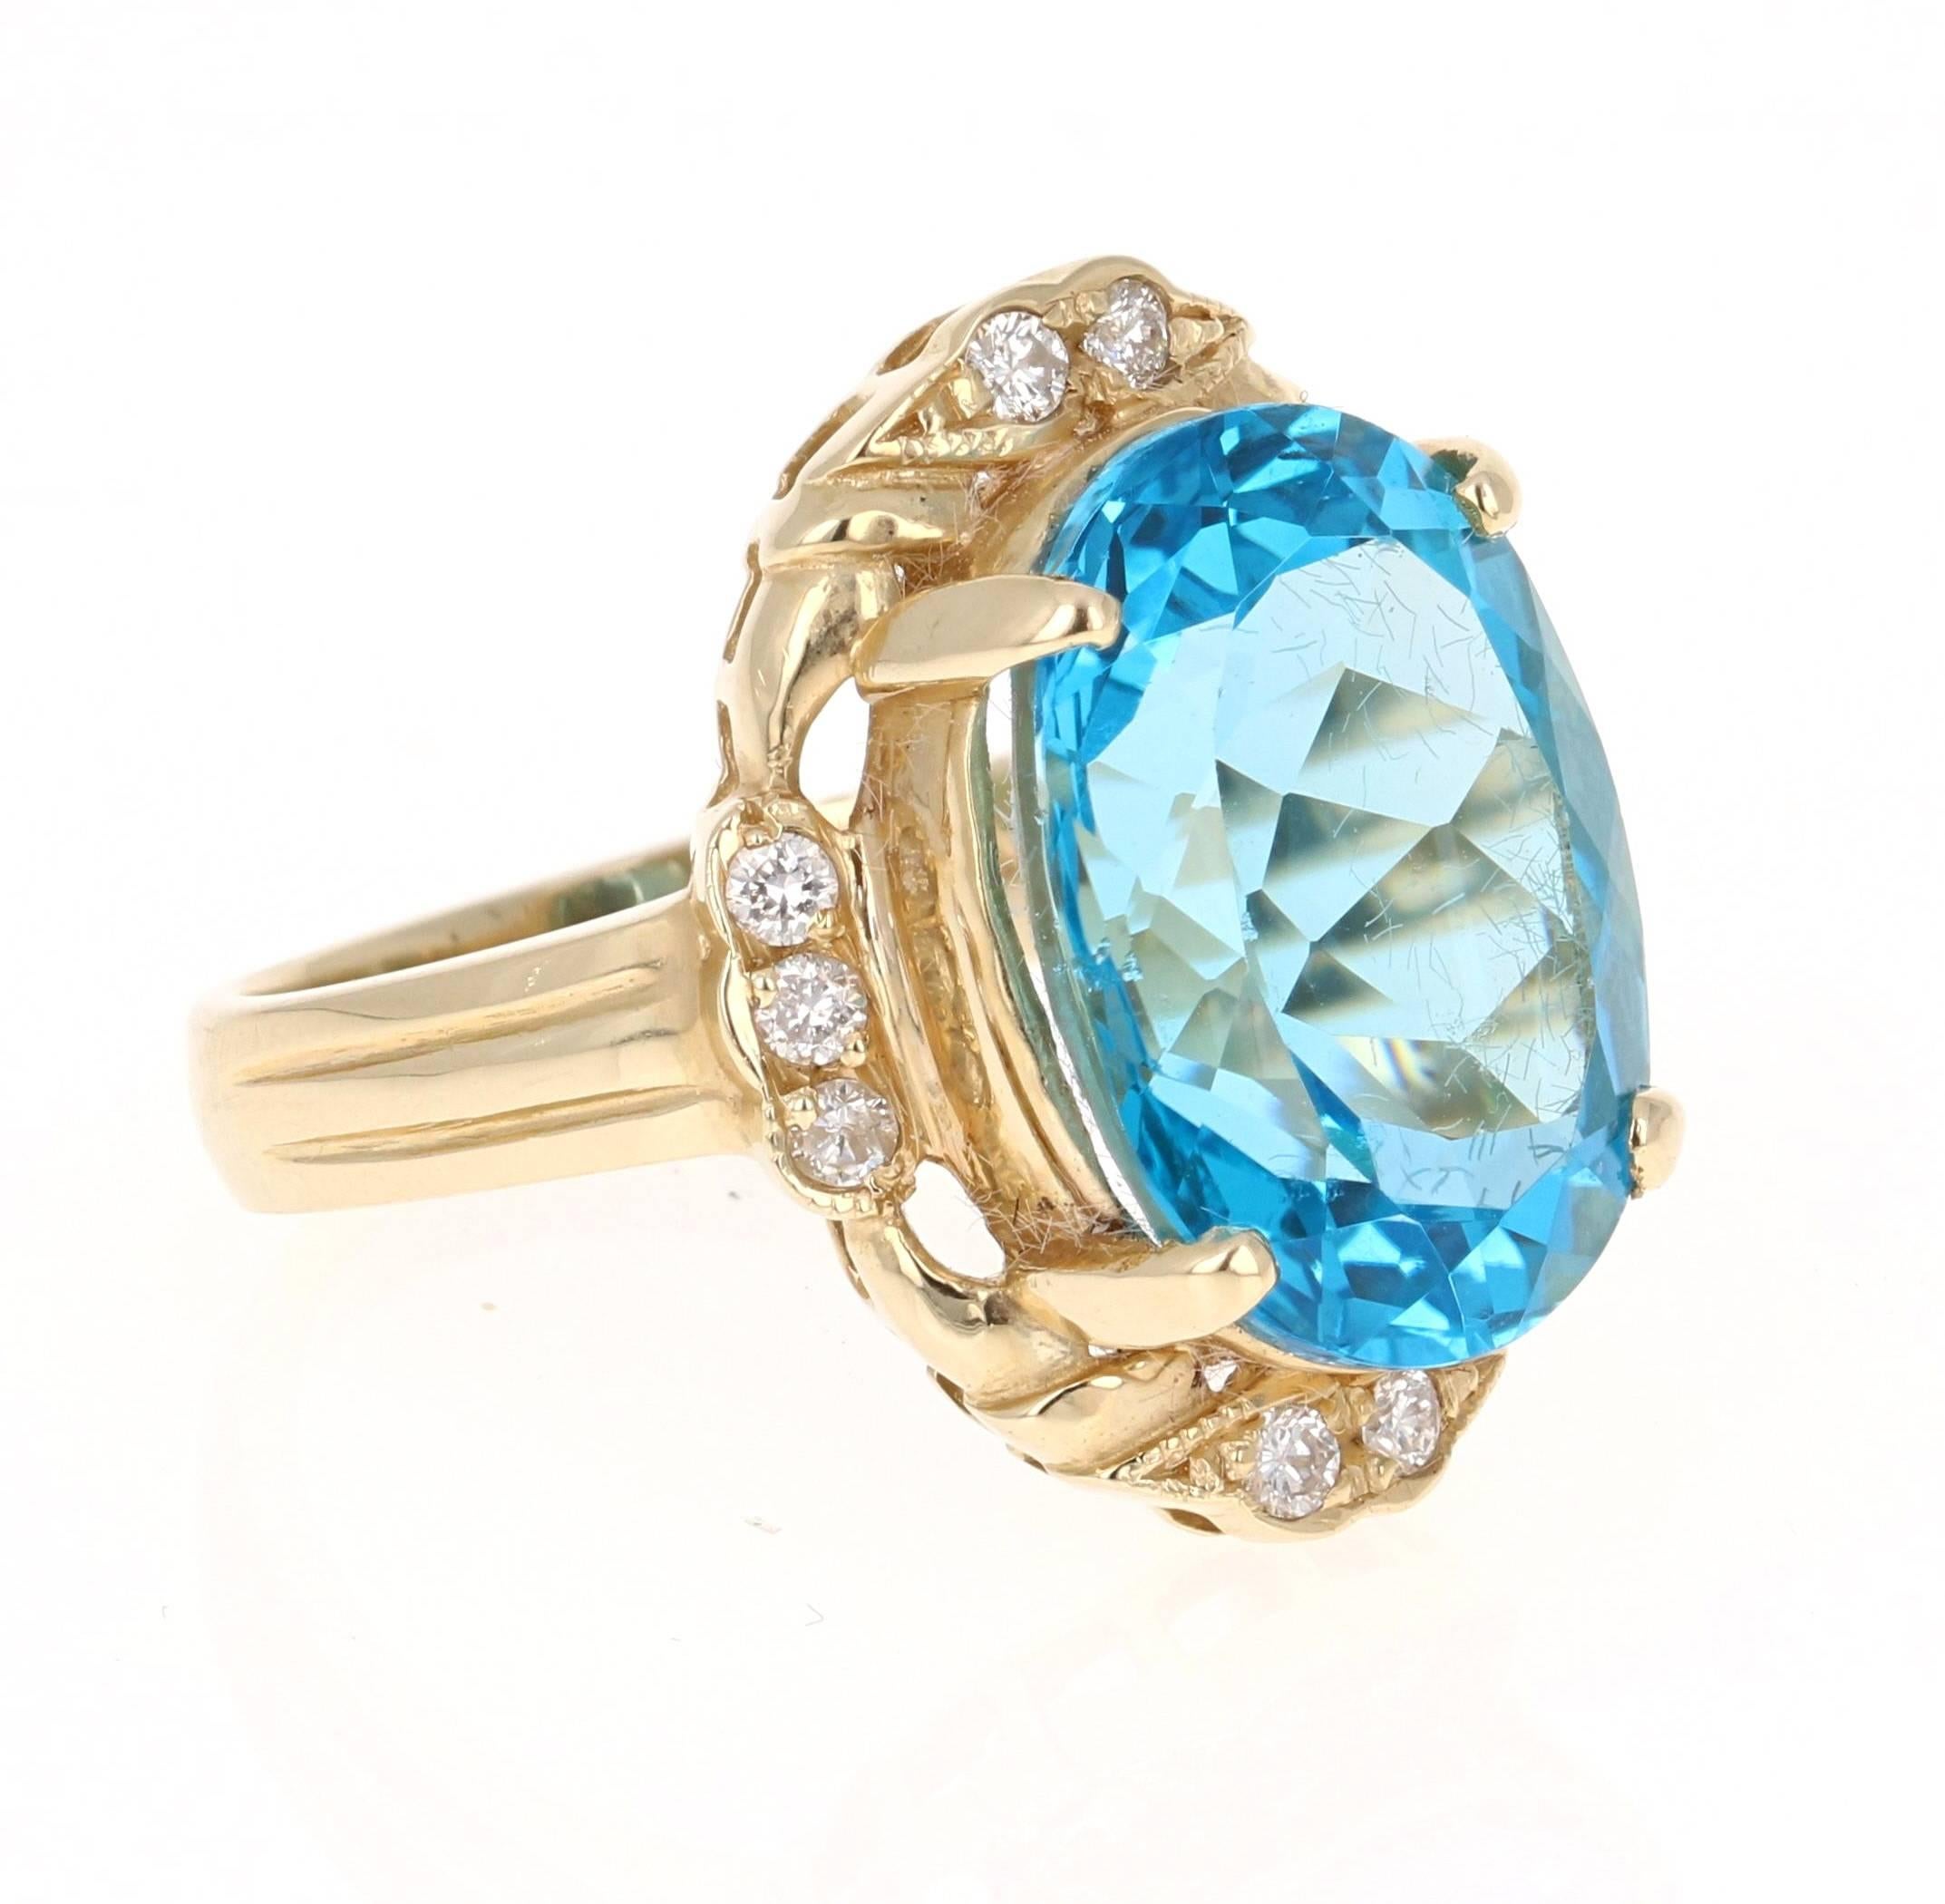 This beautiful Oval cut Blue Topaz and Diamond ring has a gorgeous 12.29 Carat Blue Topaz and its surrounded by 10 Round Cut Diamonds that weigh 0.25 Carats. The total carat weight of the ring is 12.54 Carats. The unique art-deco inspired setting is